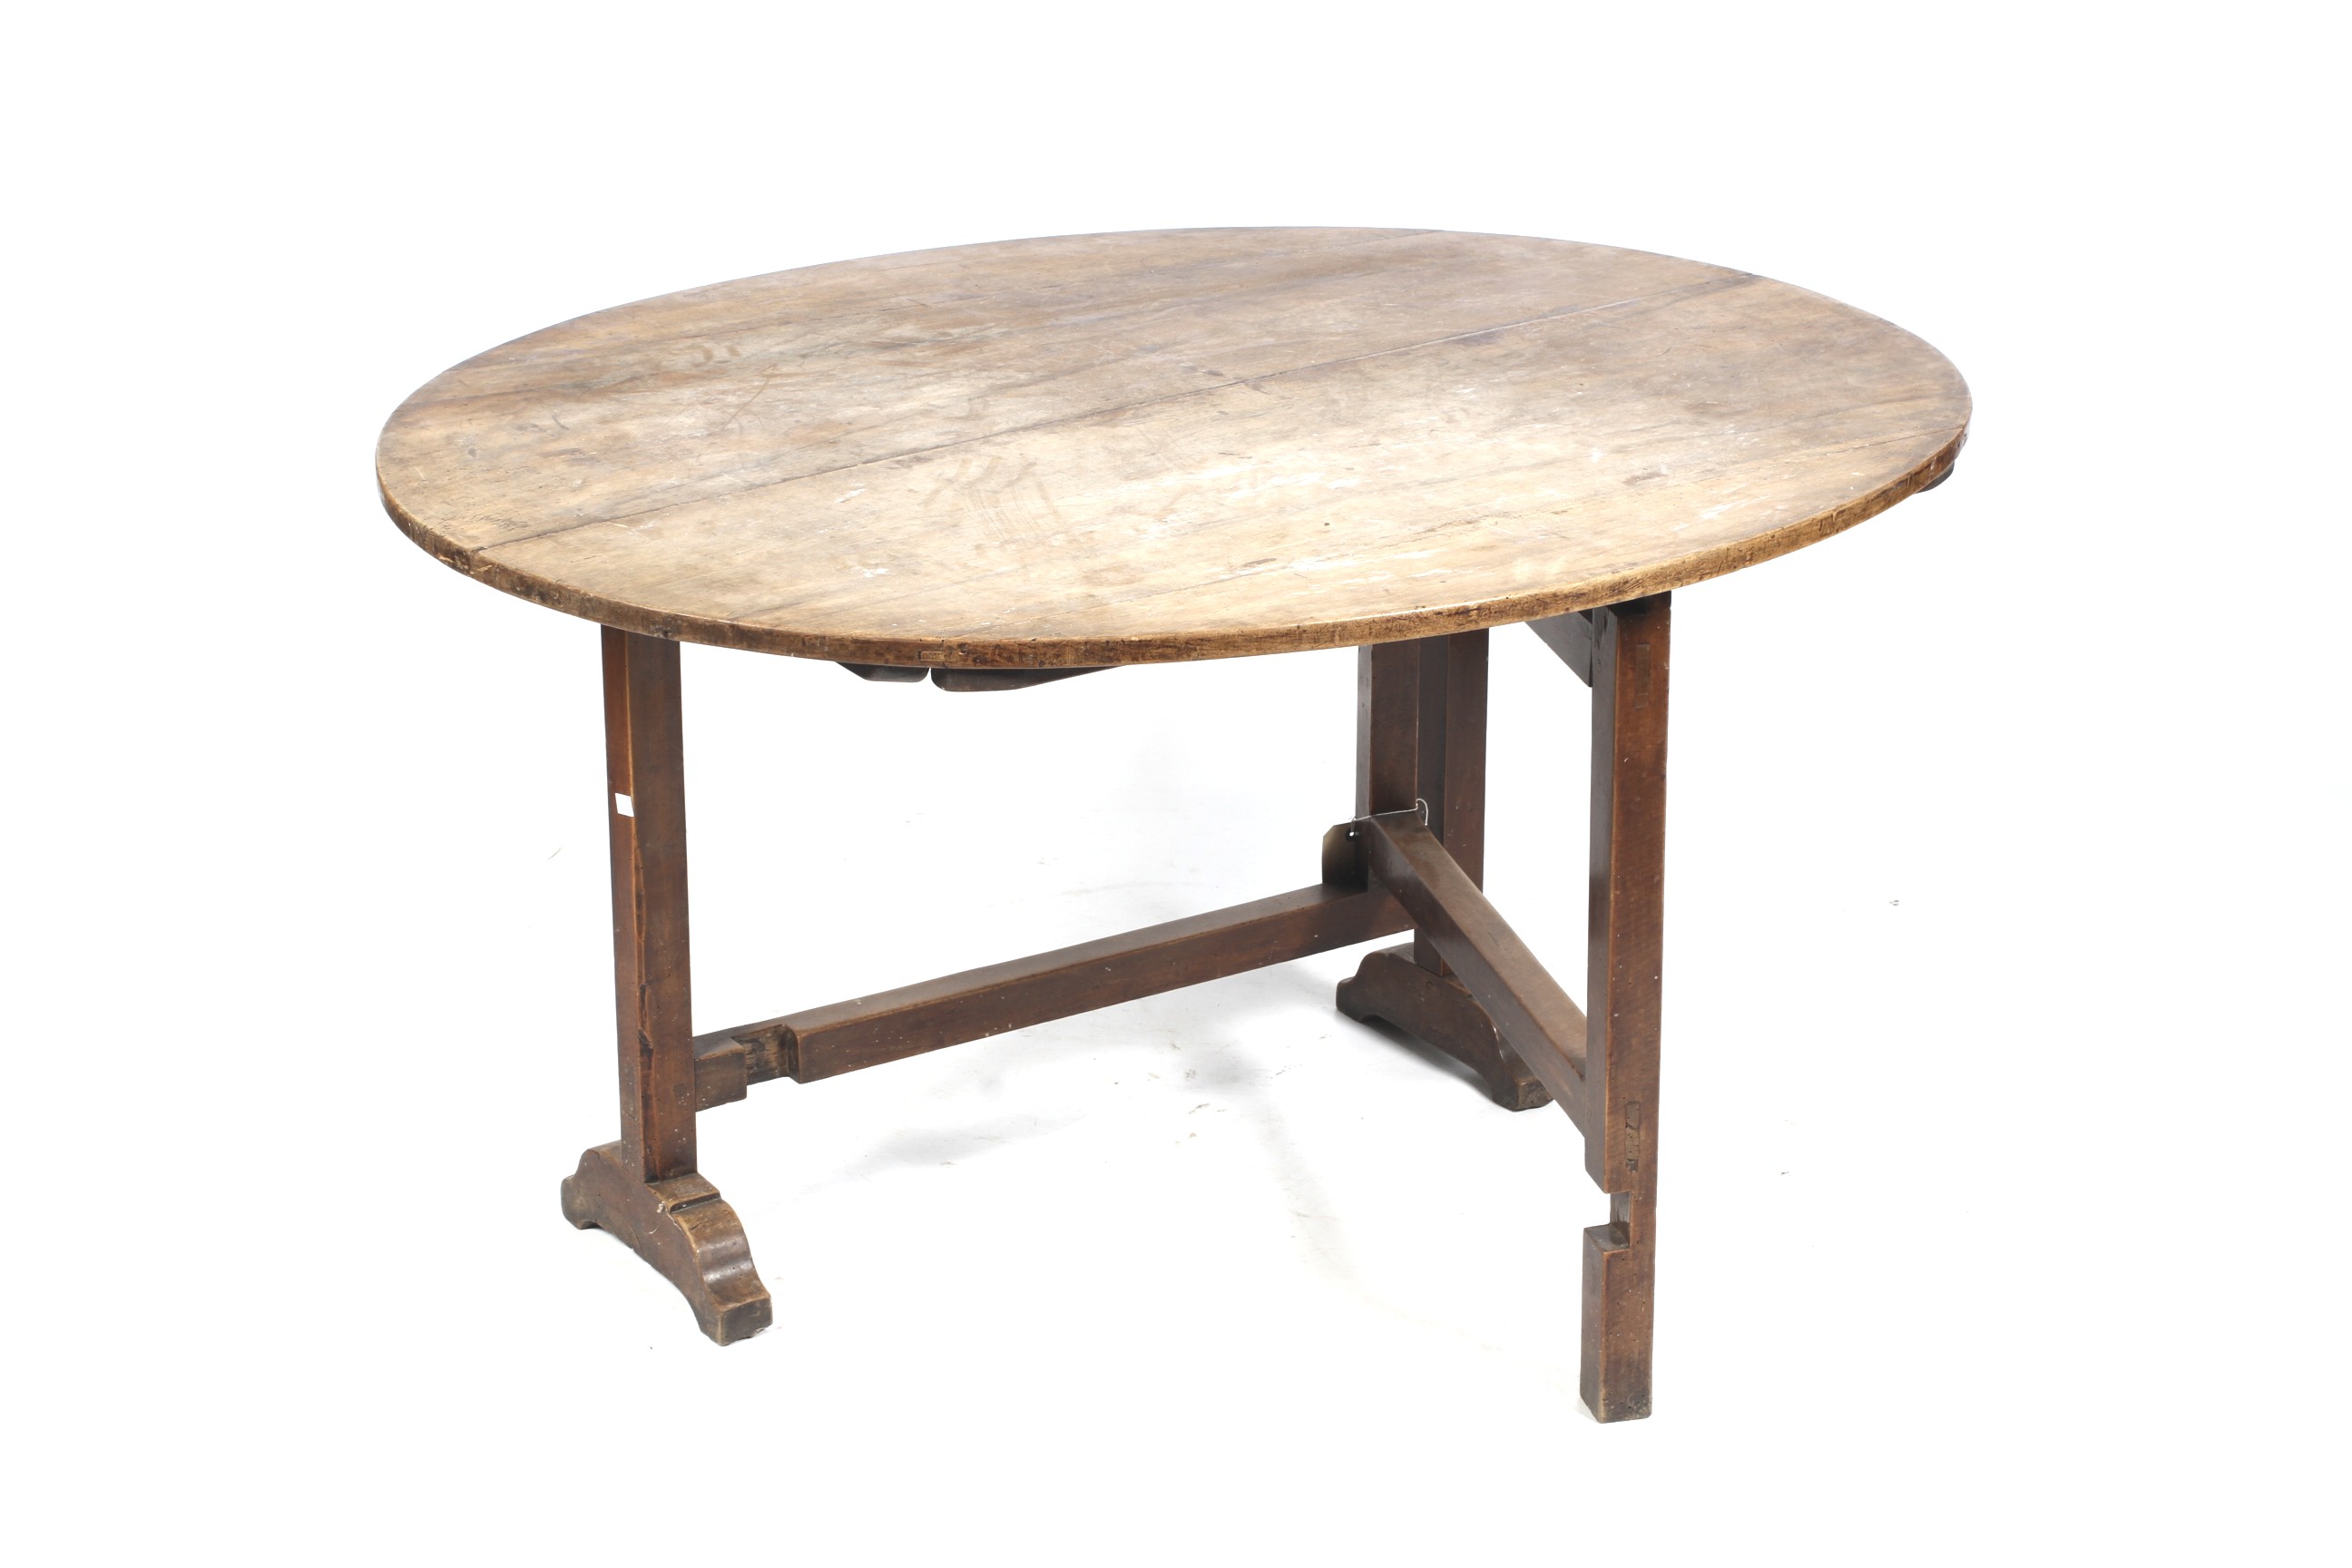 A 19th century French walnut oval tilt top table.